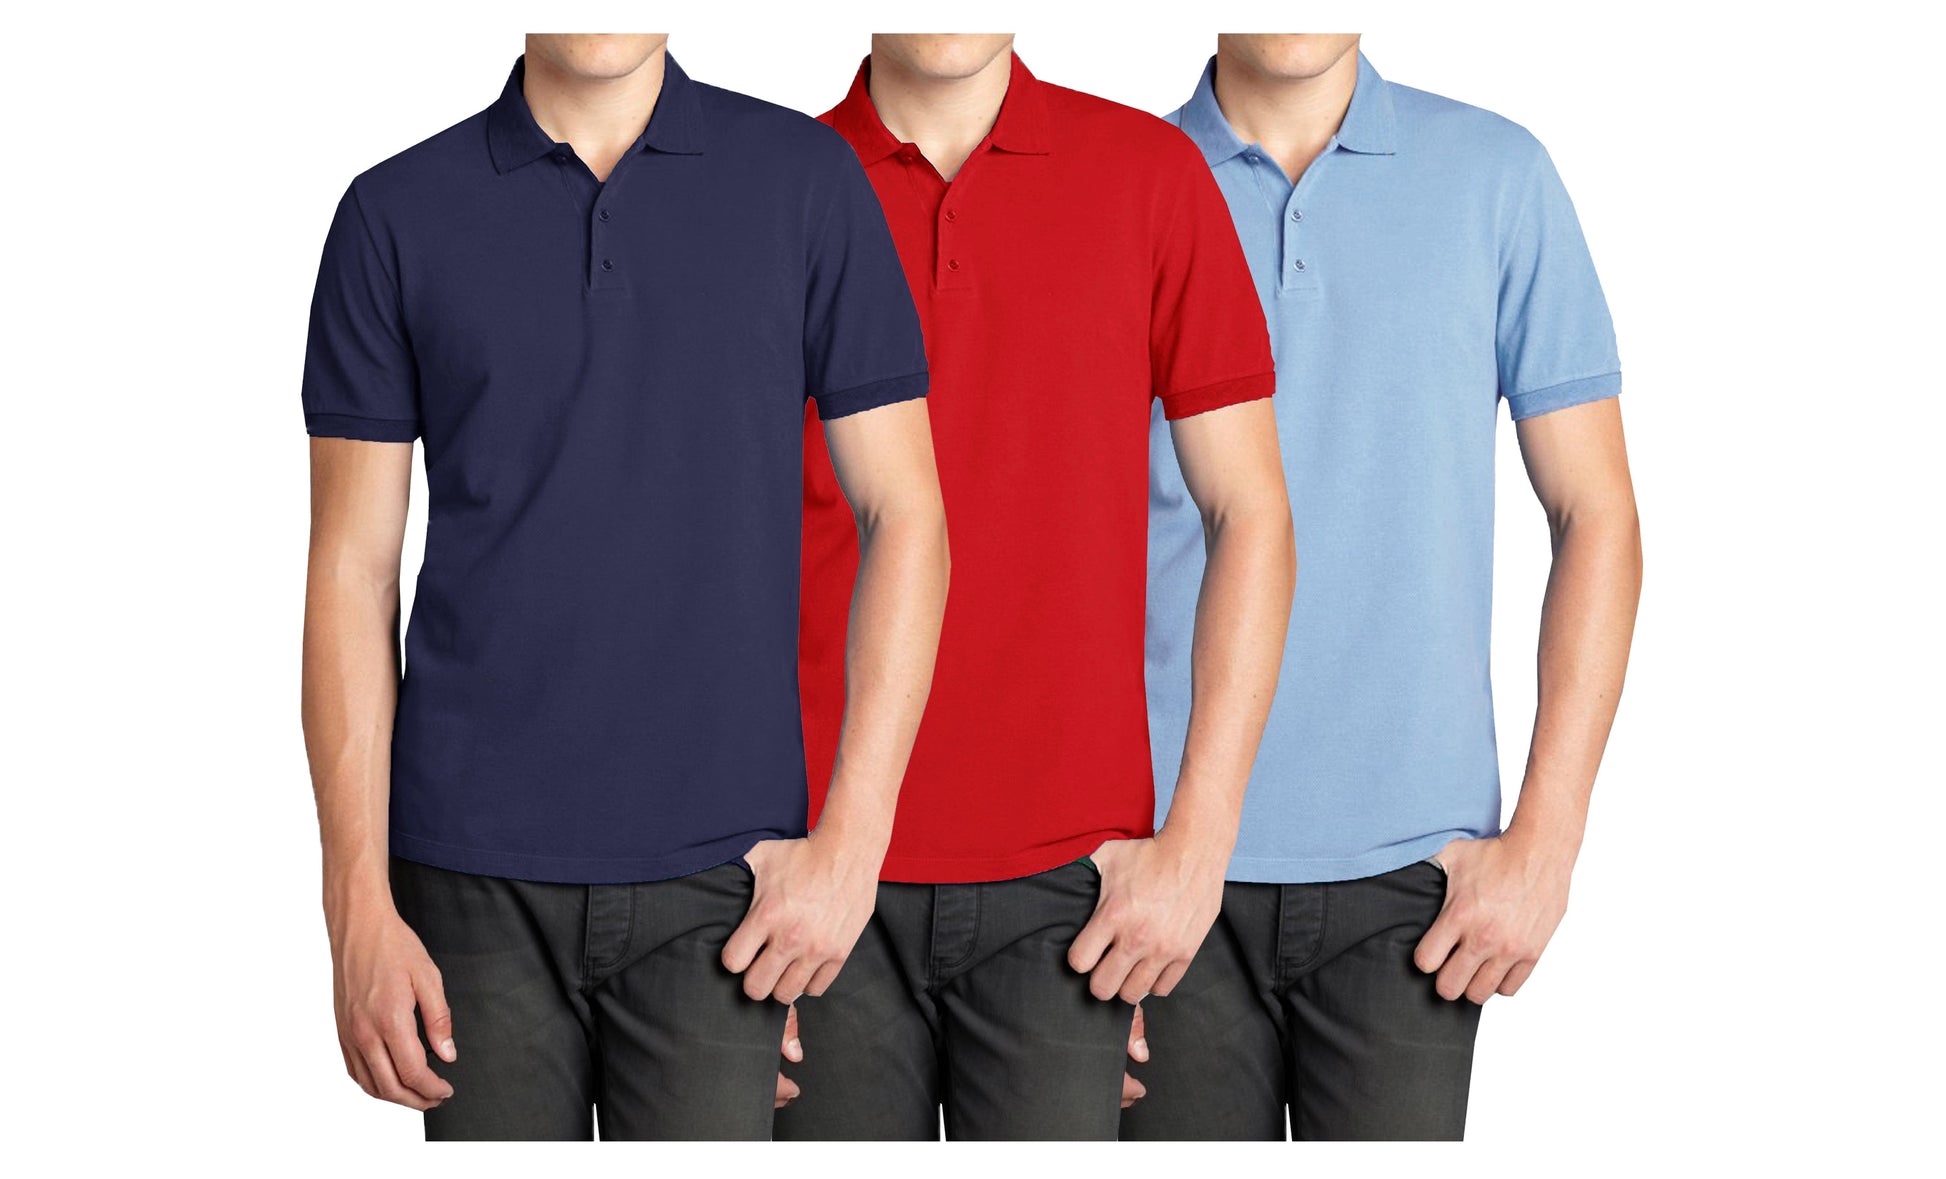 Men's (3-PACK) Short Sleeve Pique Polo Shirt (S-2X) - GalaxybyHarvic